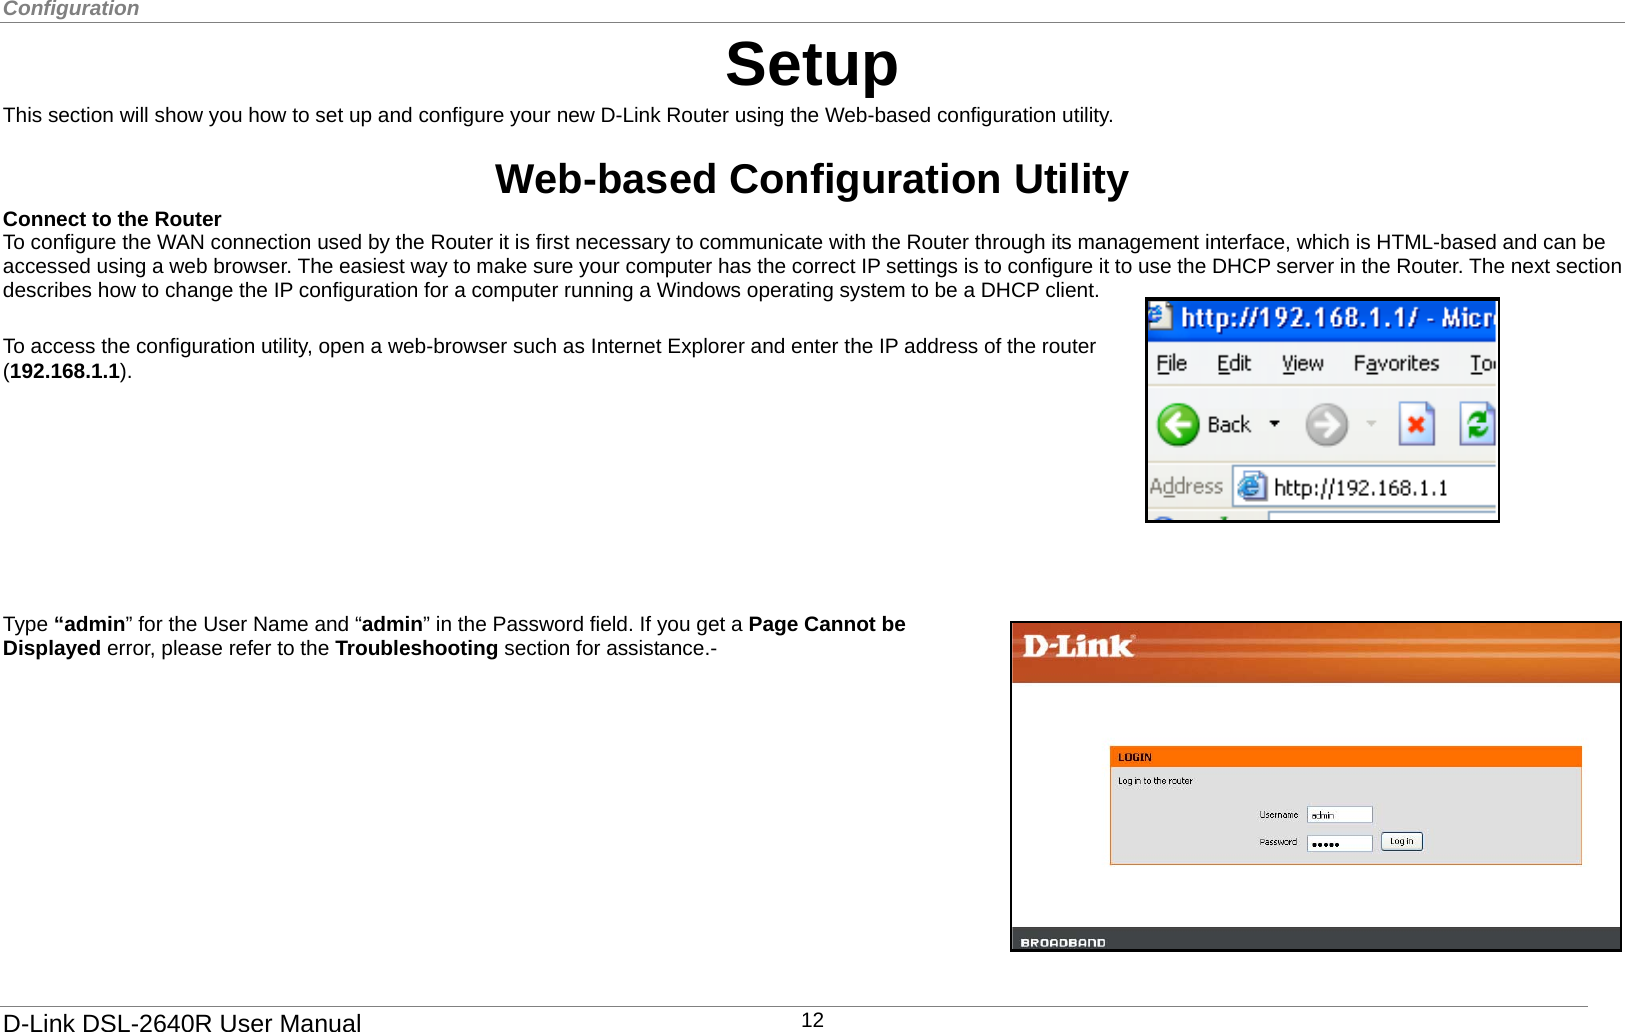 Configuration   Setup This section will show you how to set up and configure your new D-Link Router using the Web-based configuration utility.  Web-based Configuration Utility Connect to the Router   To configure the WAN connection used by the Router it is first necessary to communicate with the Router through its management interface, which is HTML-based and can be accessed using a web browser. The easiest way to make sure your computer has the correct IP settings is to configure it to use the DHCP server in the Router. The next section describes how to change the IP configuration for a computer running a Windows operating system to be a DHCP client.  To access the configuration utility, open a web-browser such as Internet Explorer and enter the IP address of the router (192.168.1.1).         Type “admin” for the User Name and “admin” in the Password field. If you get a Page Cannot be Displayed error, please refer to the Troubleshooting section for assistance.-    D-Link DSL-2640R User Manual 12